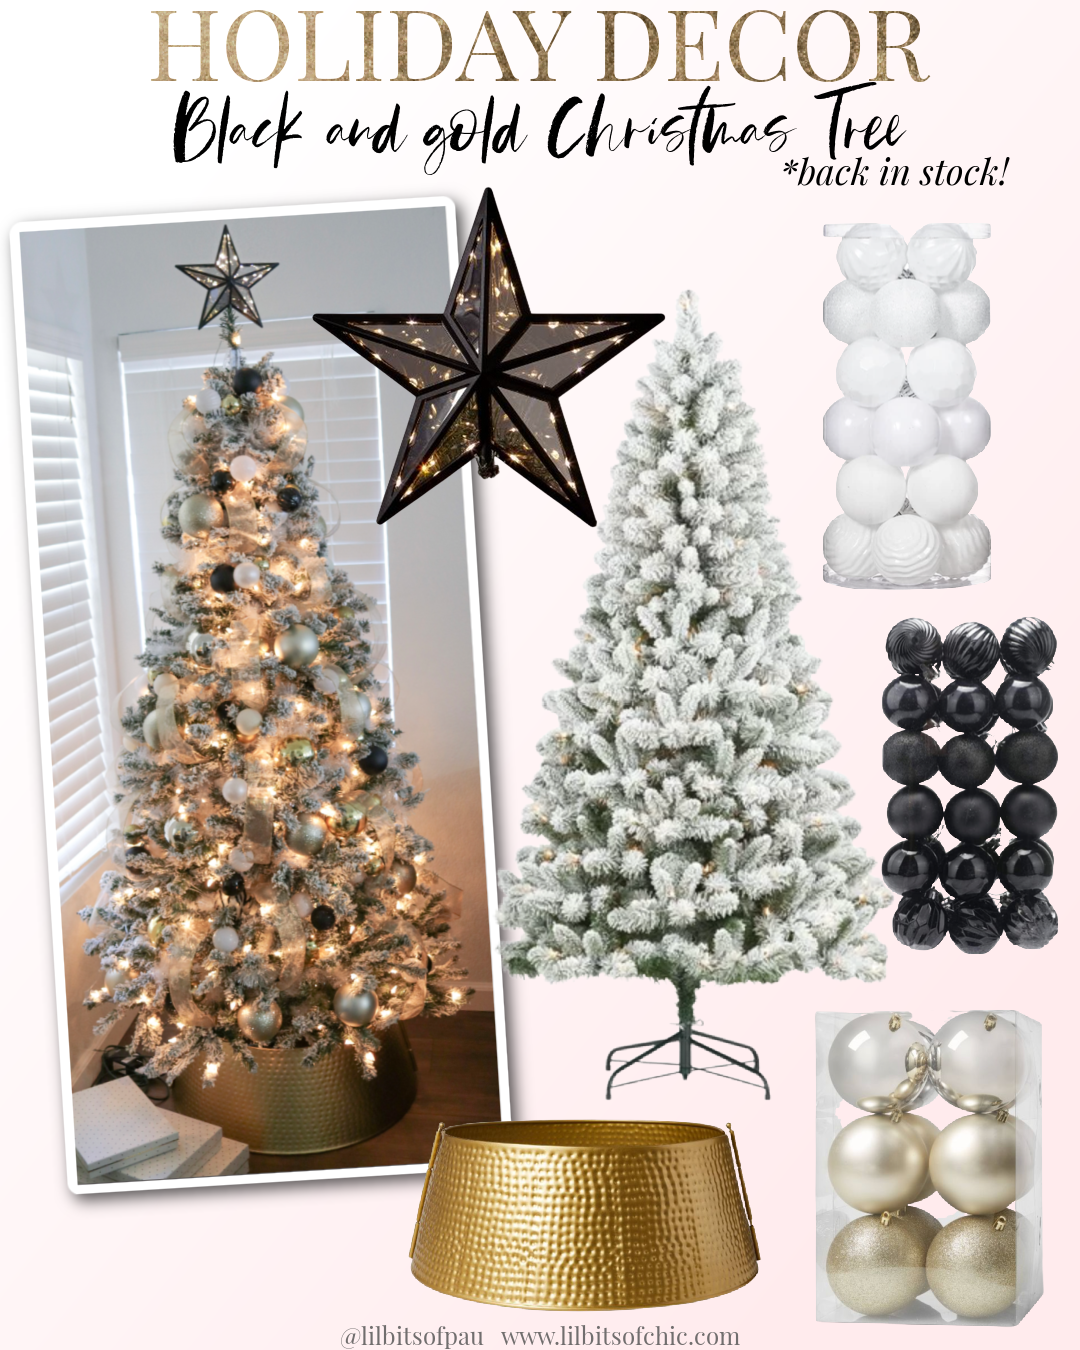 Black and gold Christmas tree decor ideas, how to decorate your Christmas tree, pre-lit flocked Christmas tree